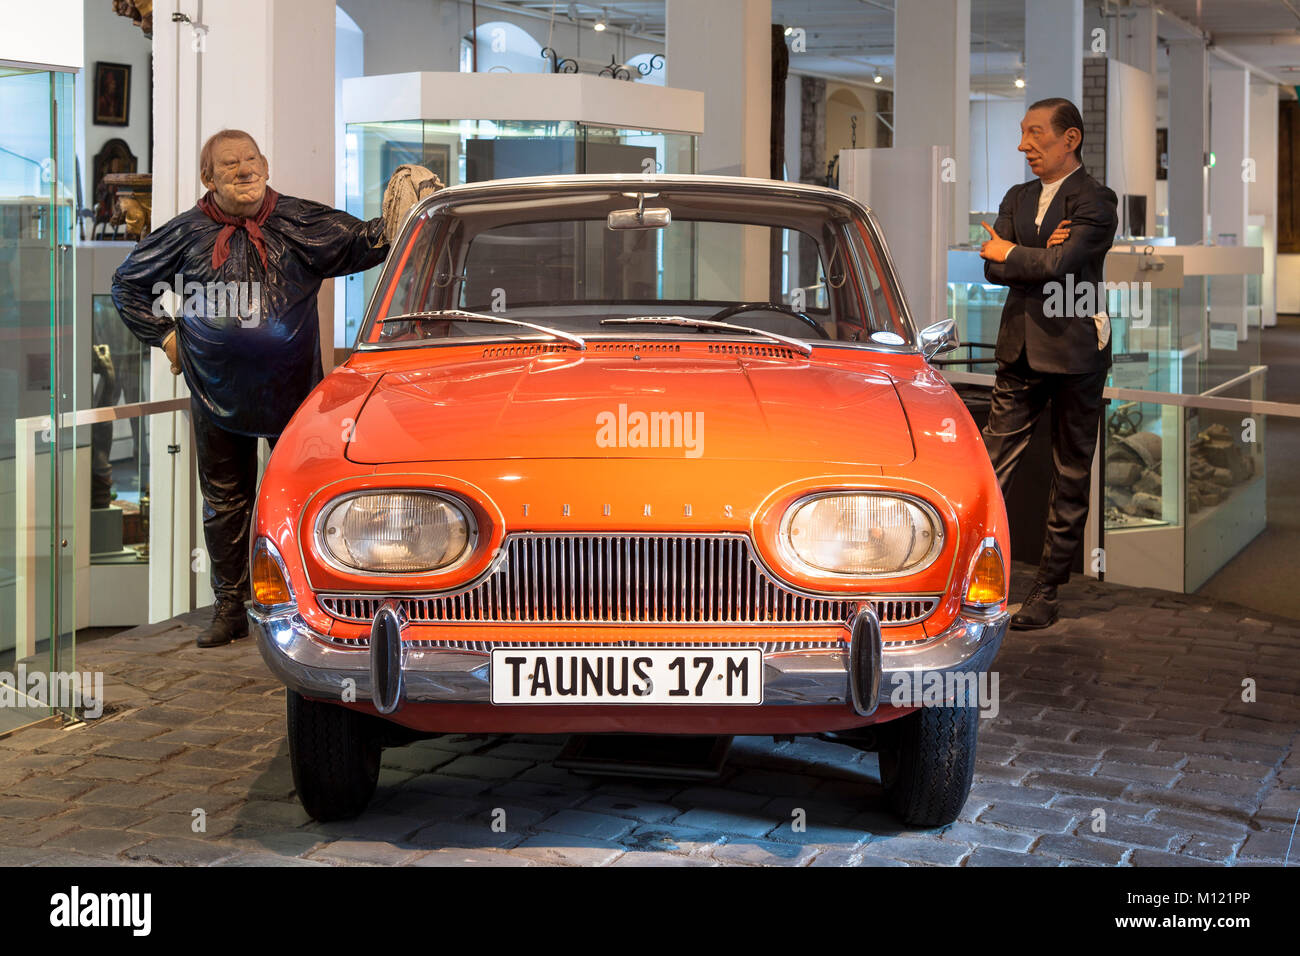 Germany, Cologne, Cologne City Museum, it provides an insight into the history of the city of Cologne, Ford Taunus 17 M with the Cologne figures Tuenn Stock Photo